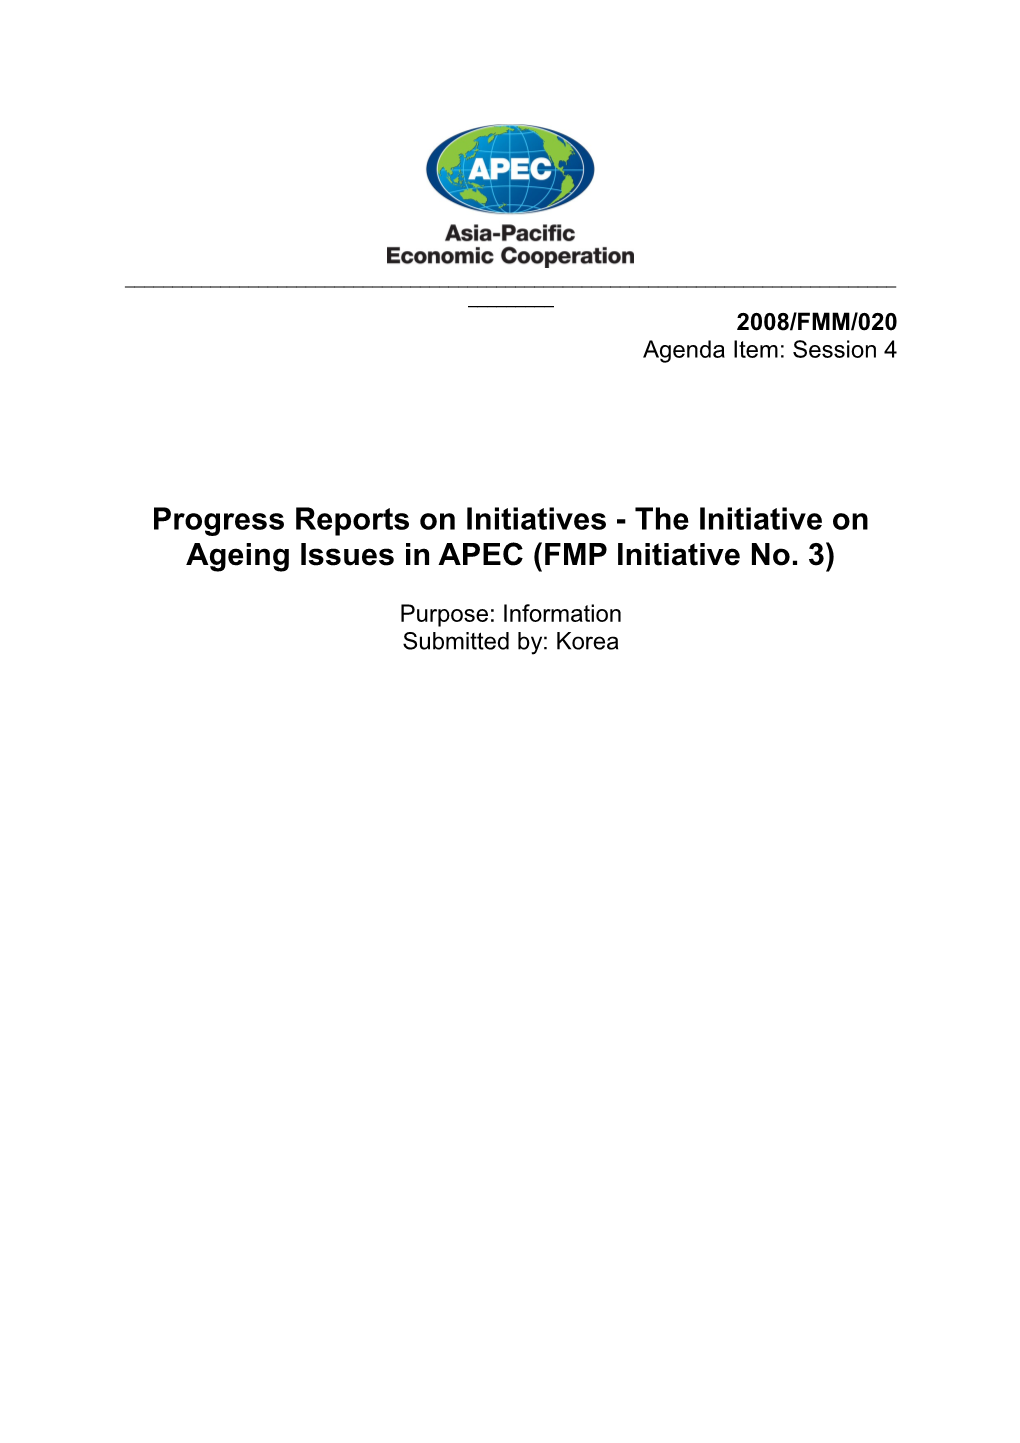 Progress Reports on Initiatives - the Initiative on Ageing Issues in APEC (FMP Initiative